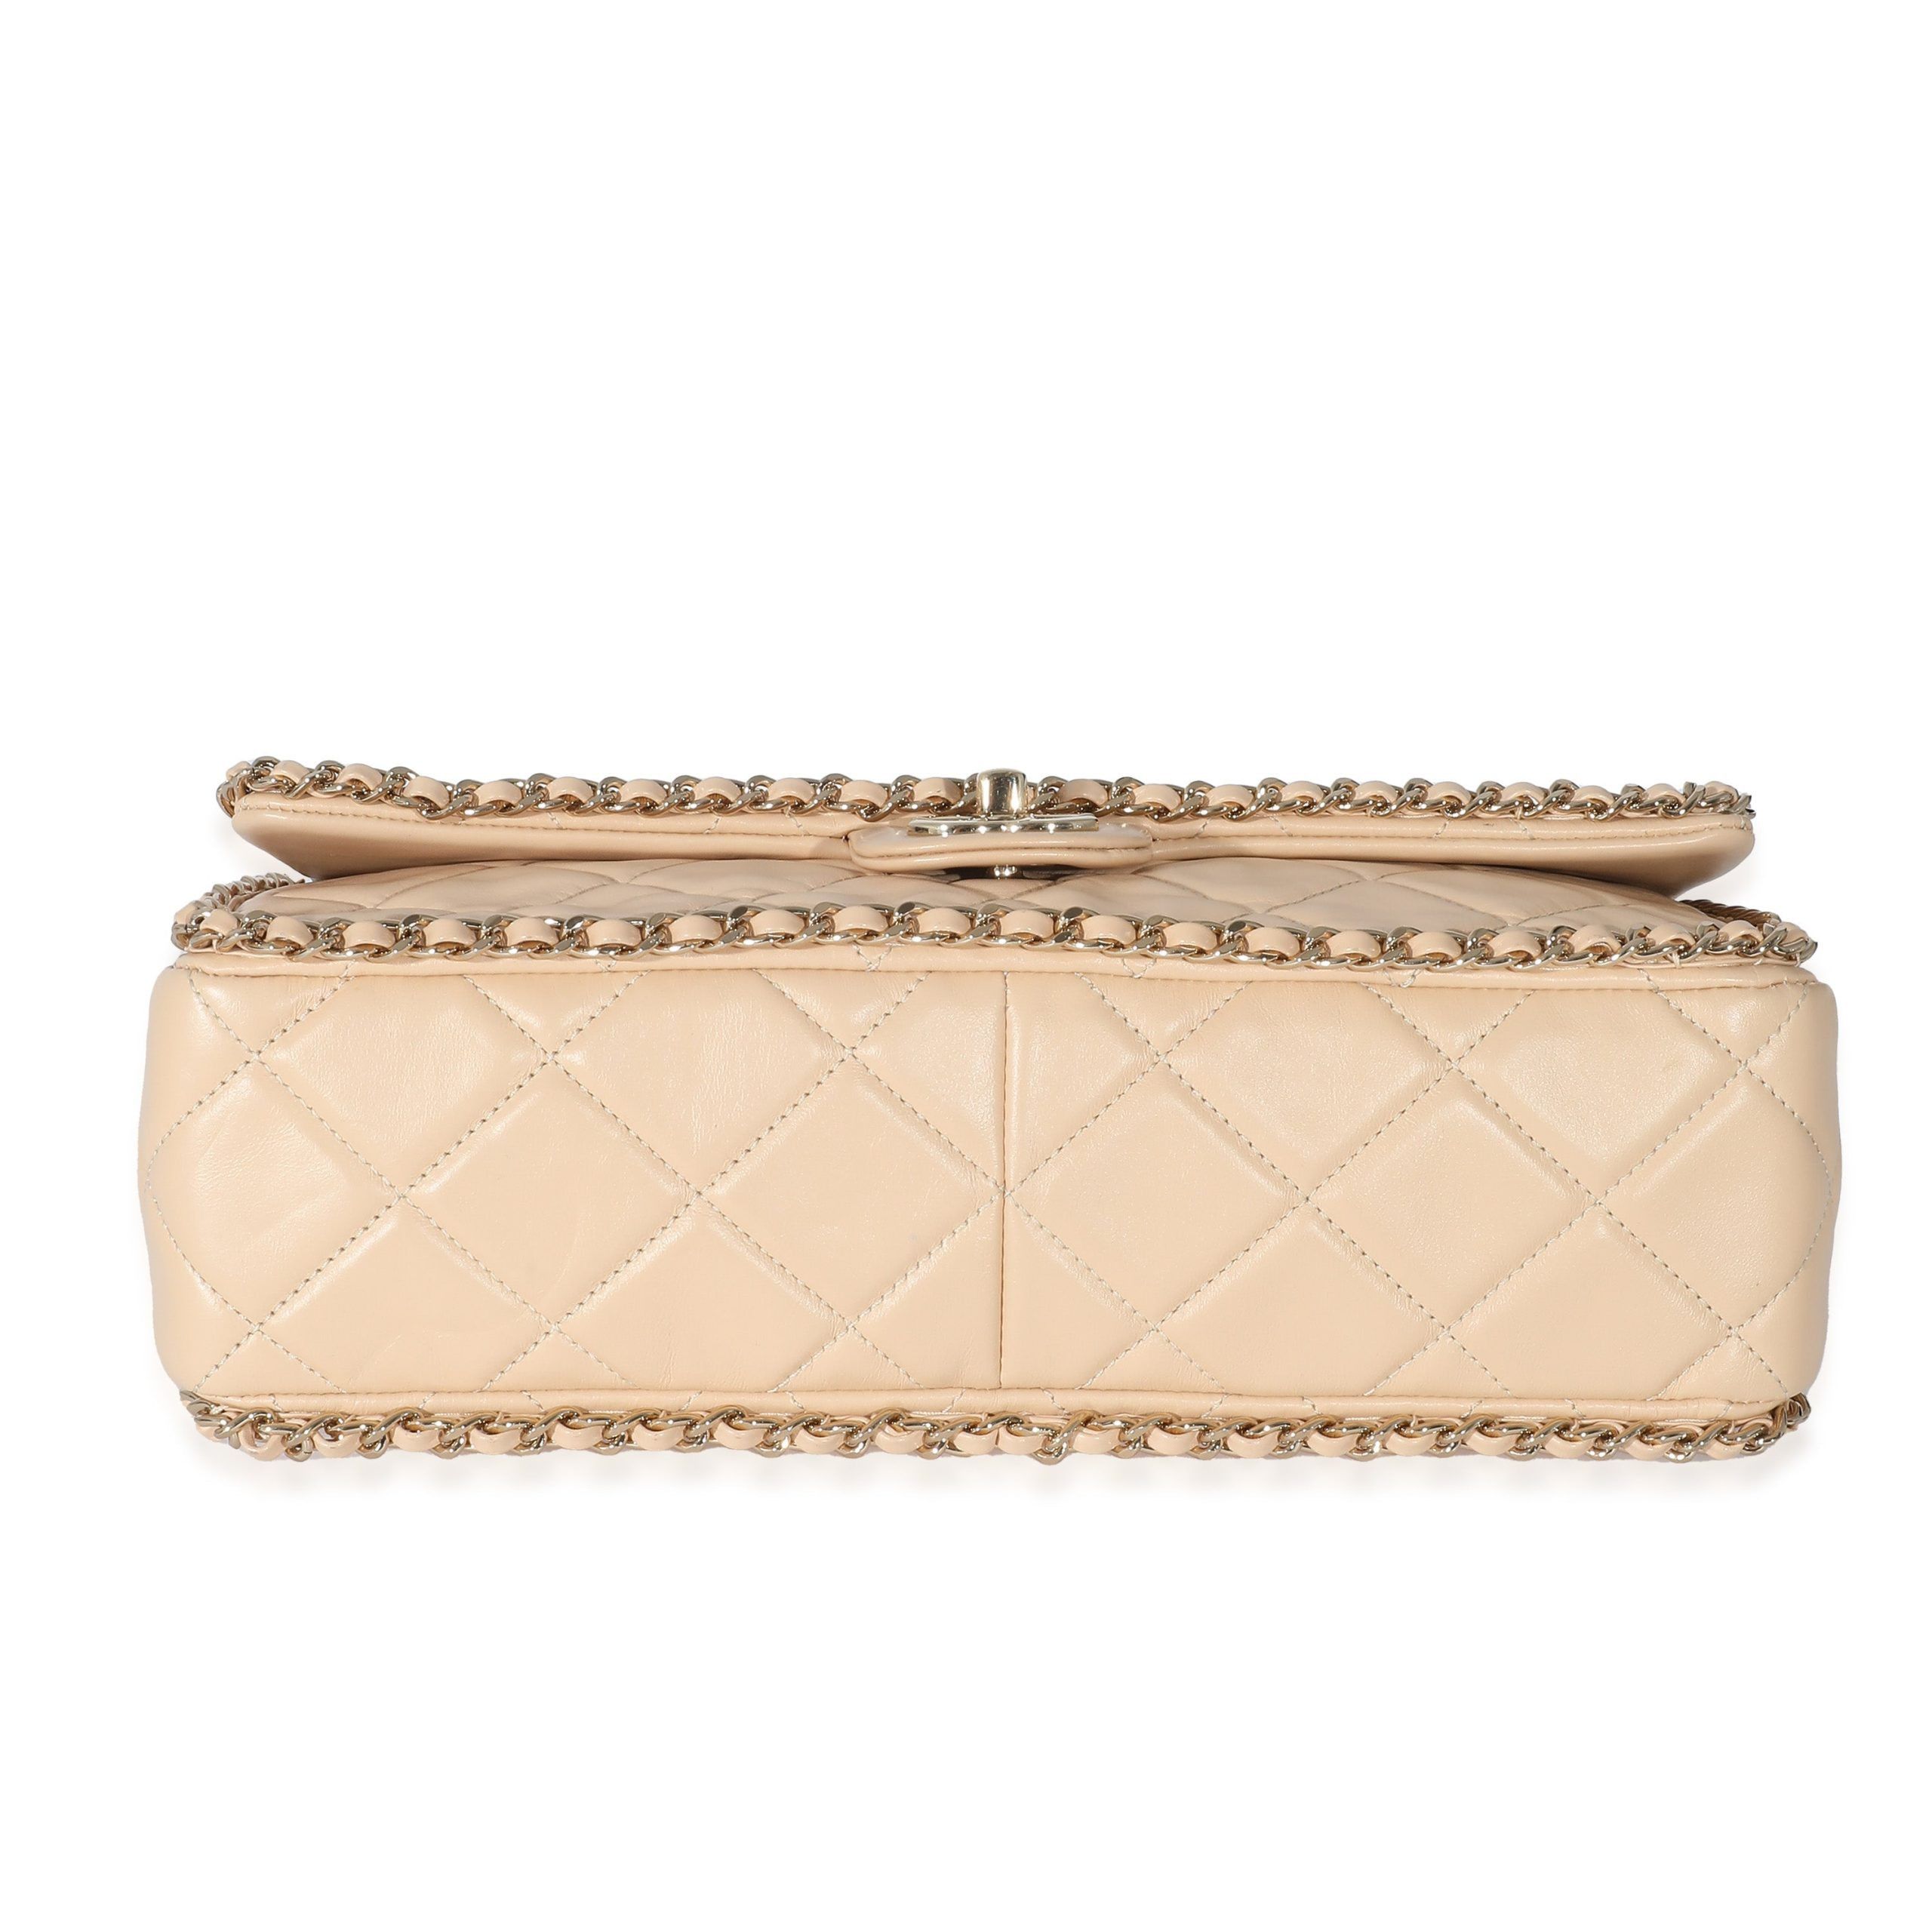 Chanel Chanel Beige Crumpled Calfskin Medium Chain All Over Flap Bag Size ONE SIZE - 6 Thumbnail